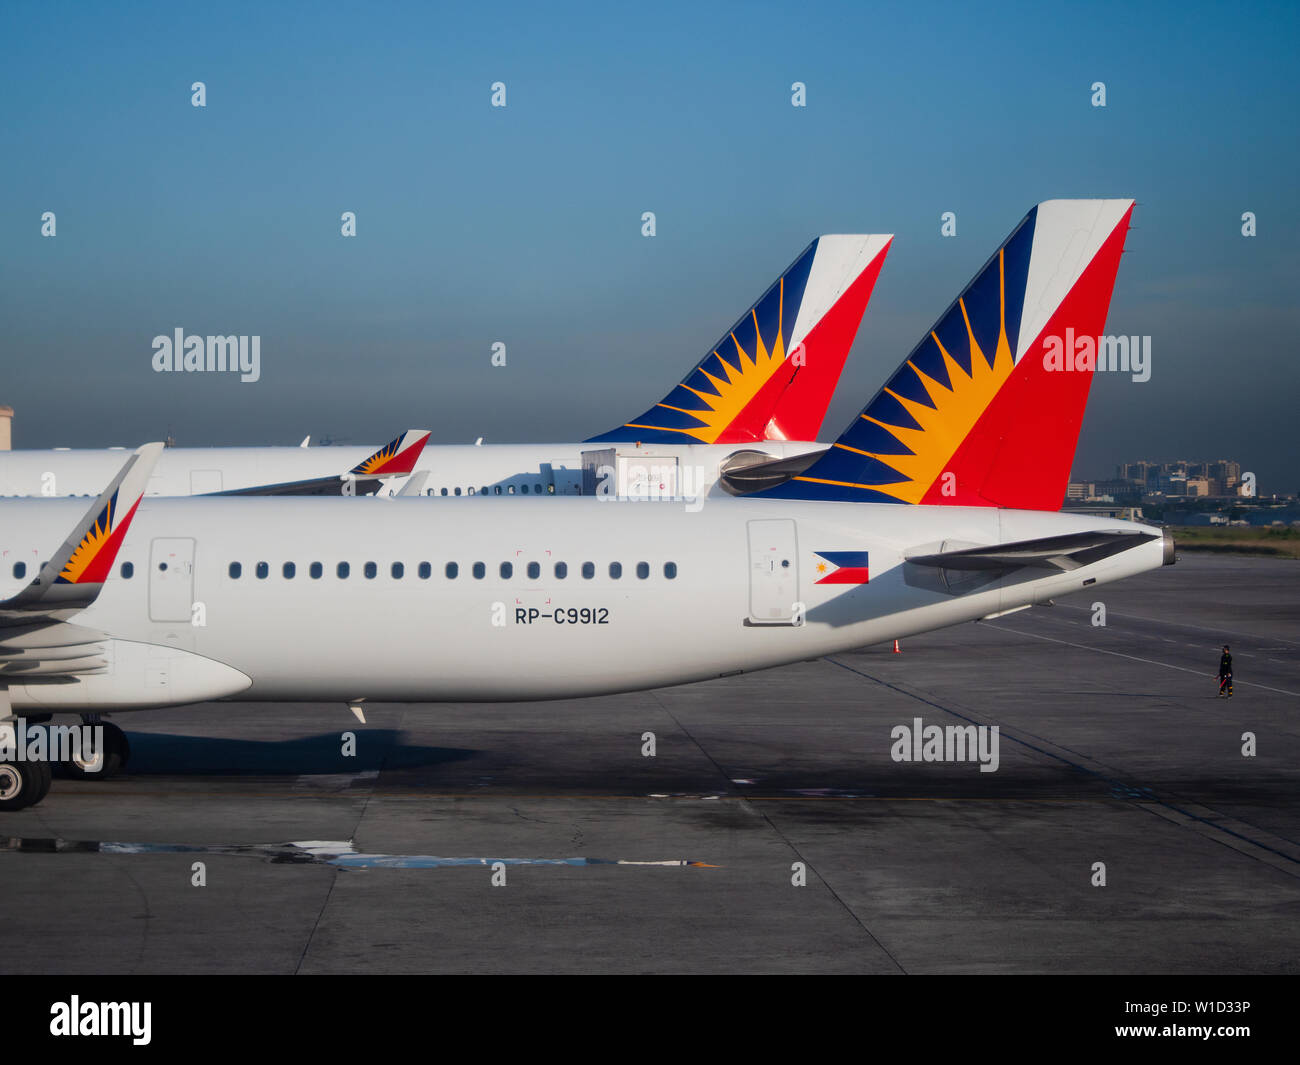 Manila, the Philippines - March 28, 2019: Two Philippine Airlines airliners, an Airbus A320 and an Airbus A330, at Ninoy Aquino International Airport, Stock Photo